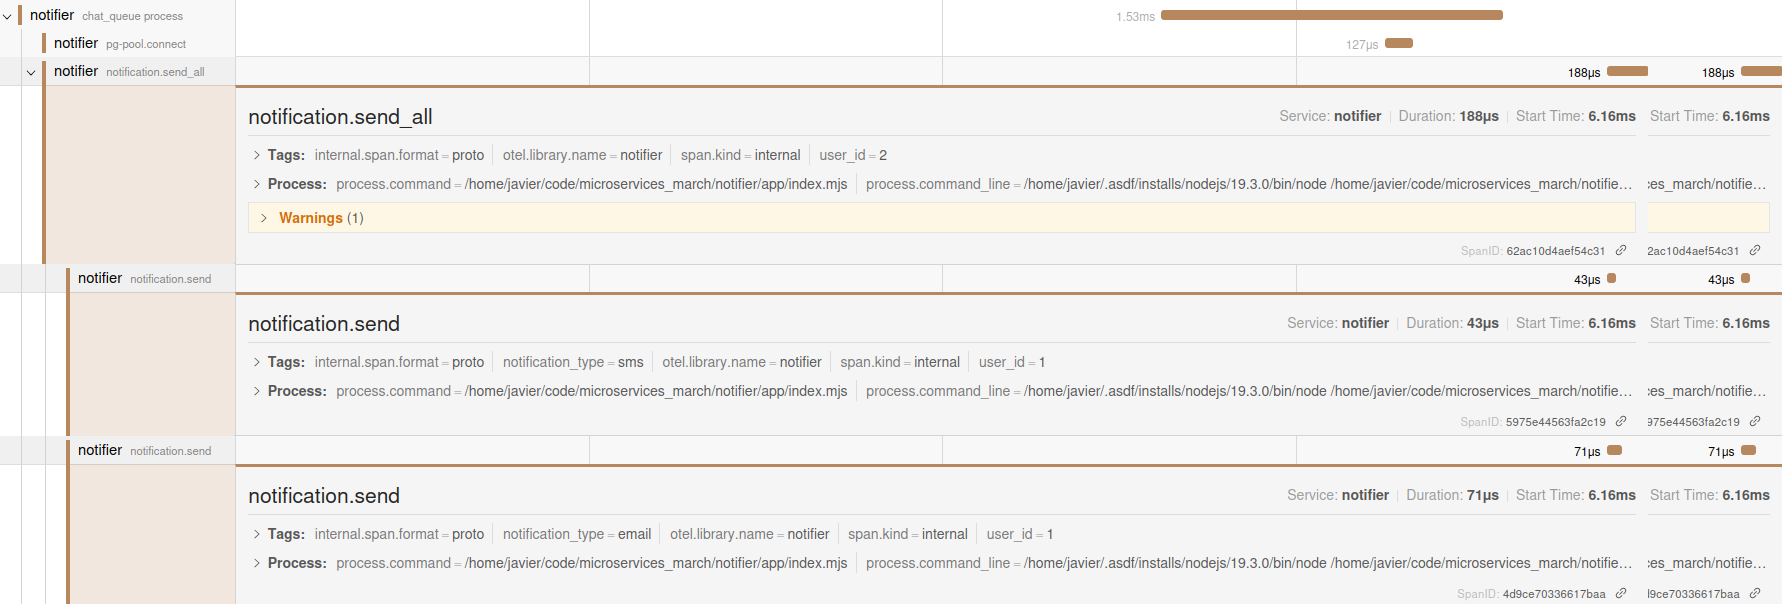 Screenshot of Jaeger GUI showing the result of defining three new spans in the code for the notifier service